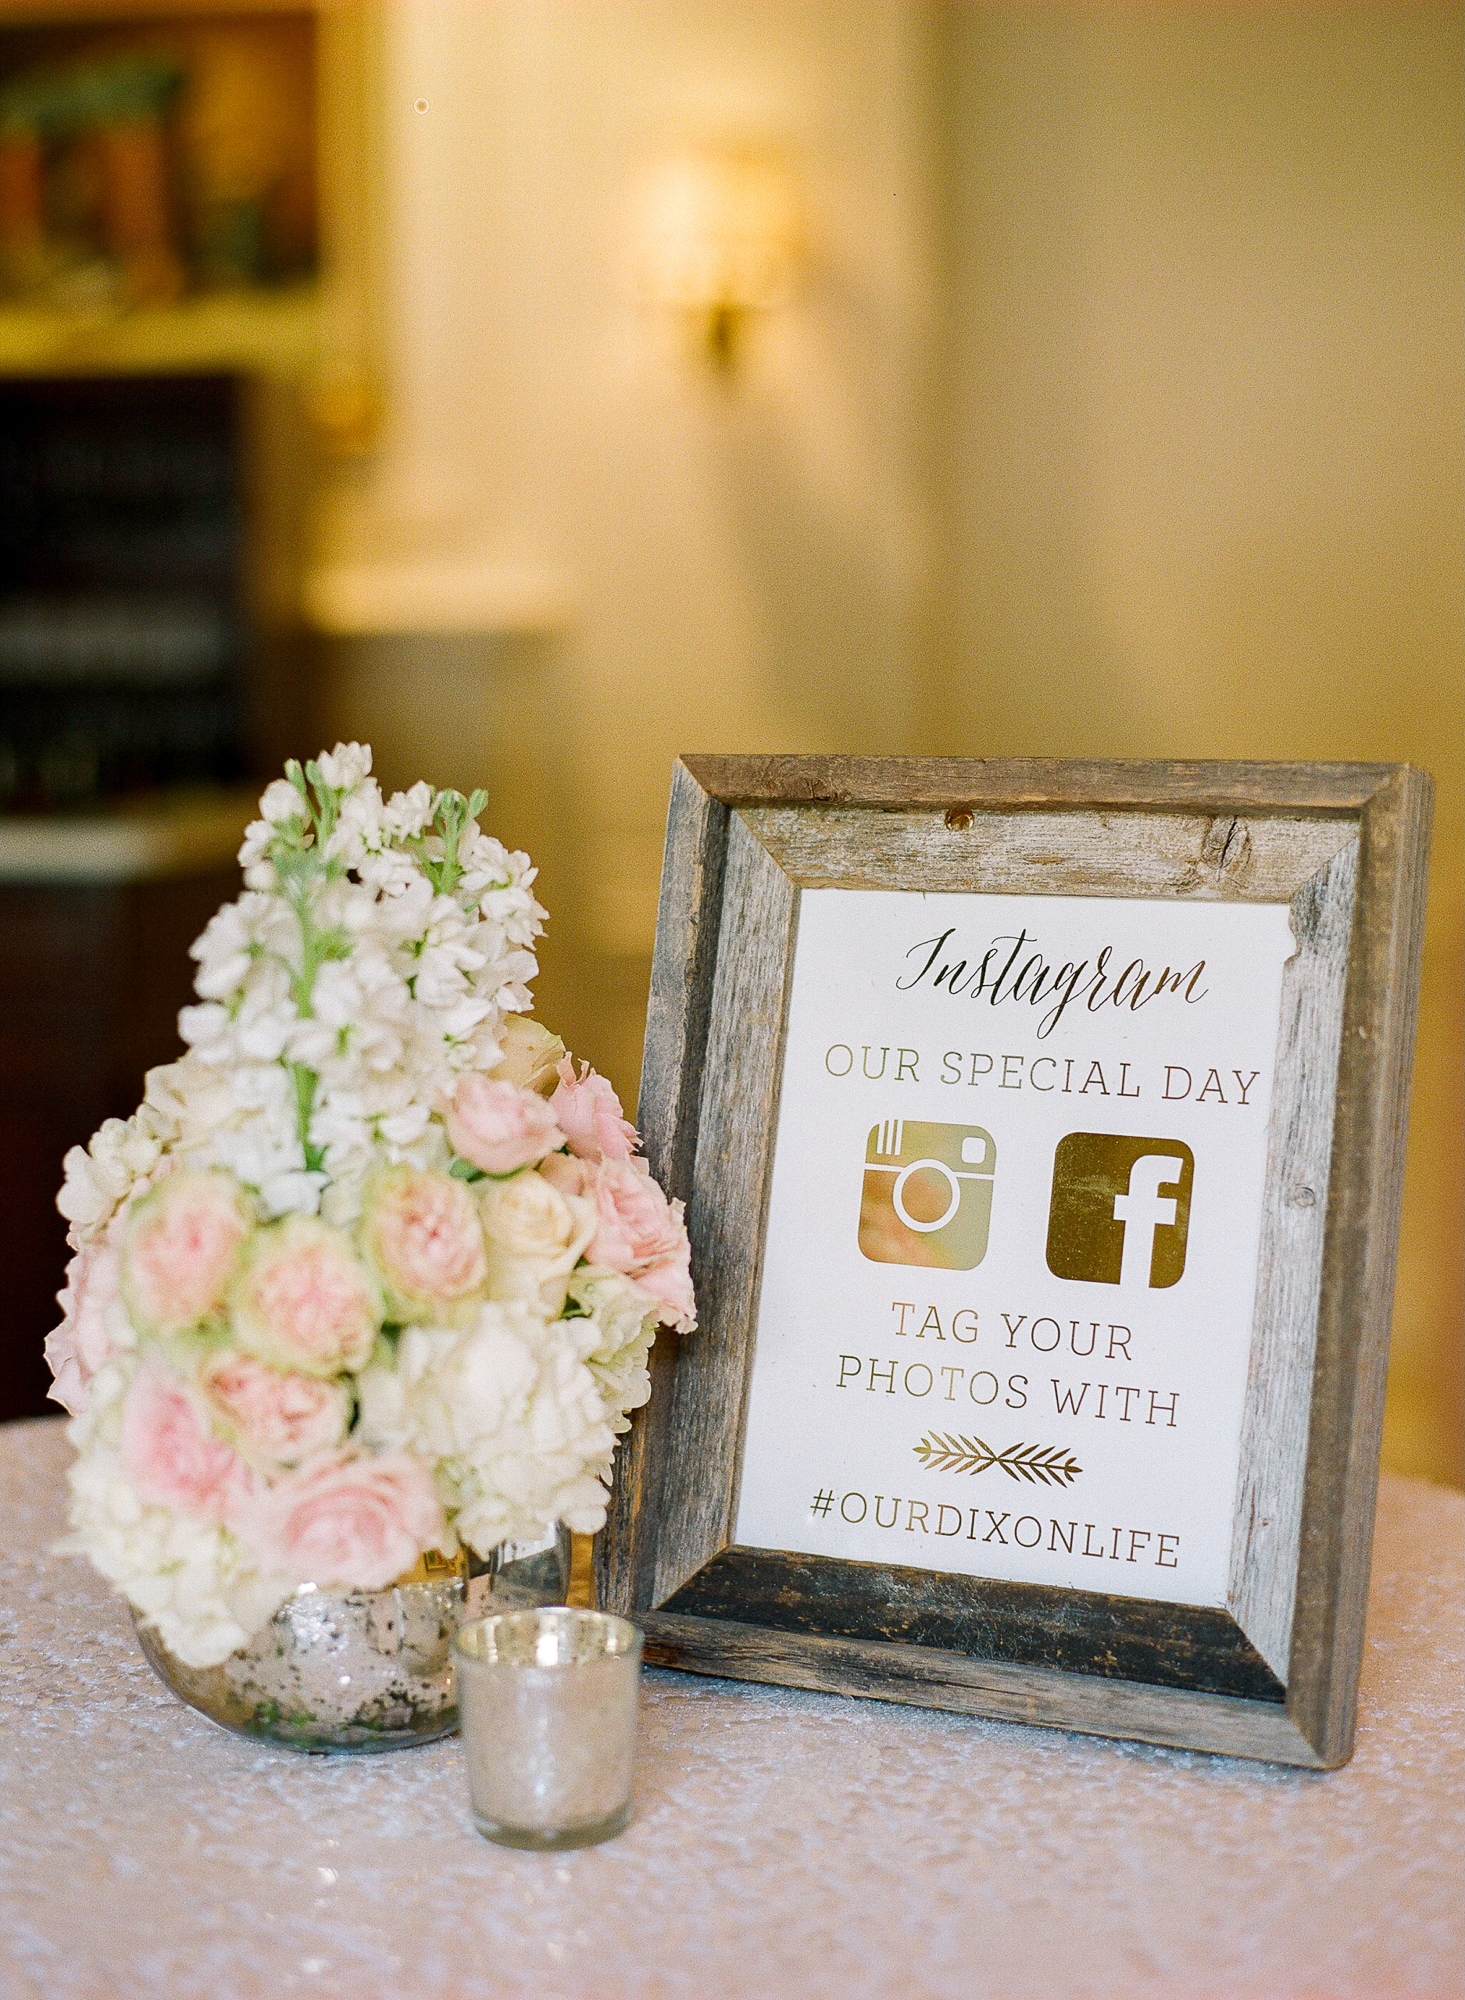 We had matching social media signs throughout the wedding